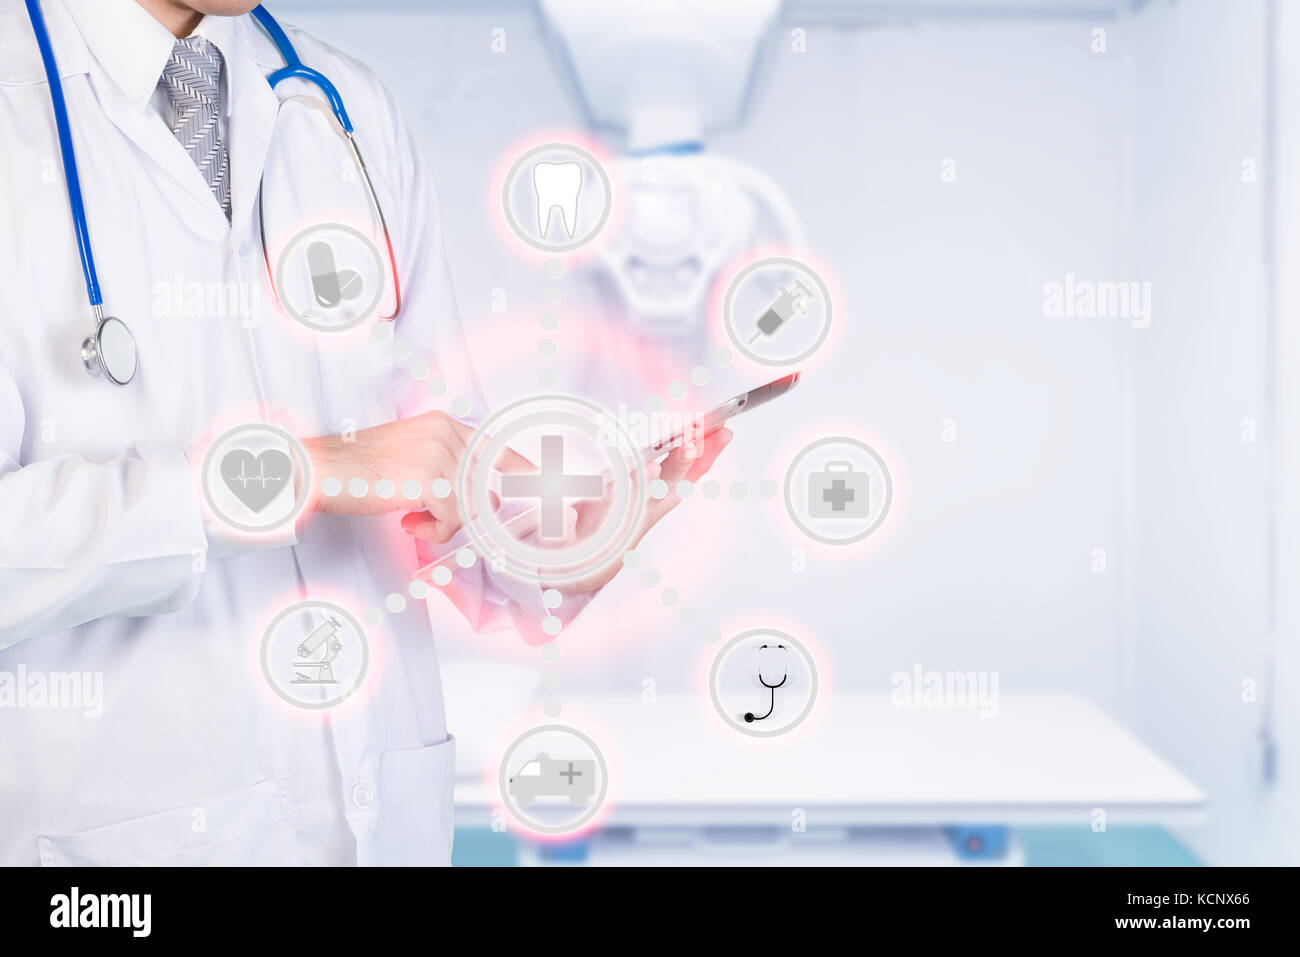 Smart medicine doctor using automation app on digital tablet in a hospital. Internet of things concept at hospital. Smart technology 4.0 Stock Photo